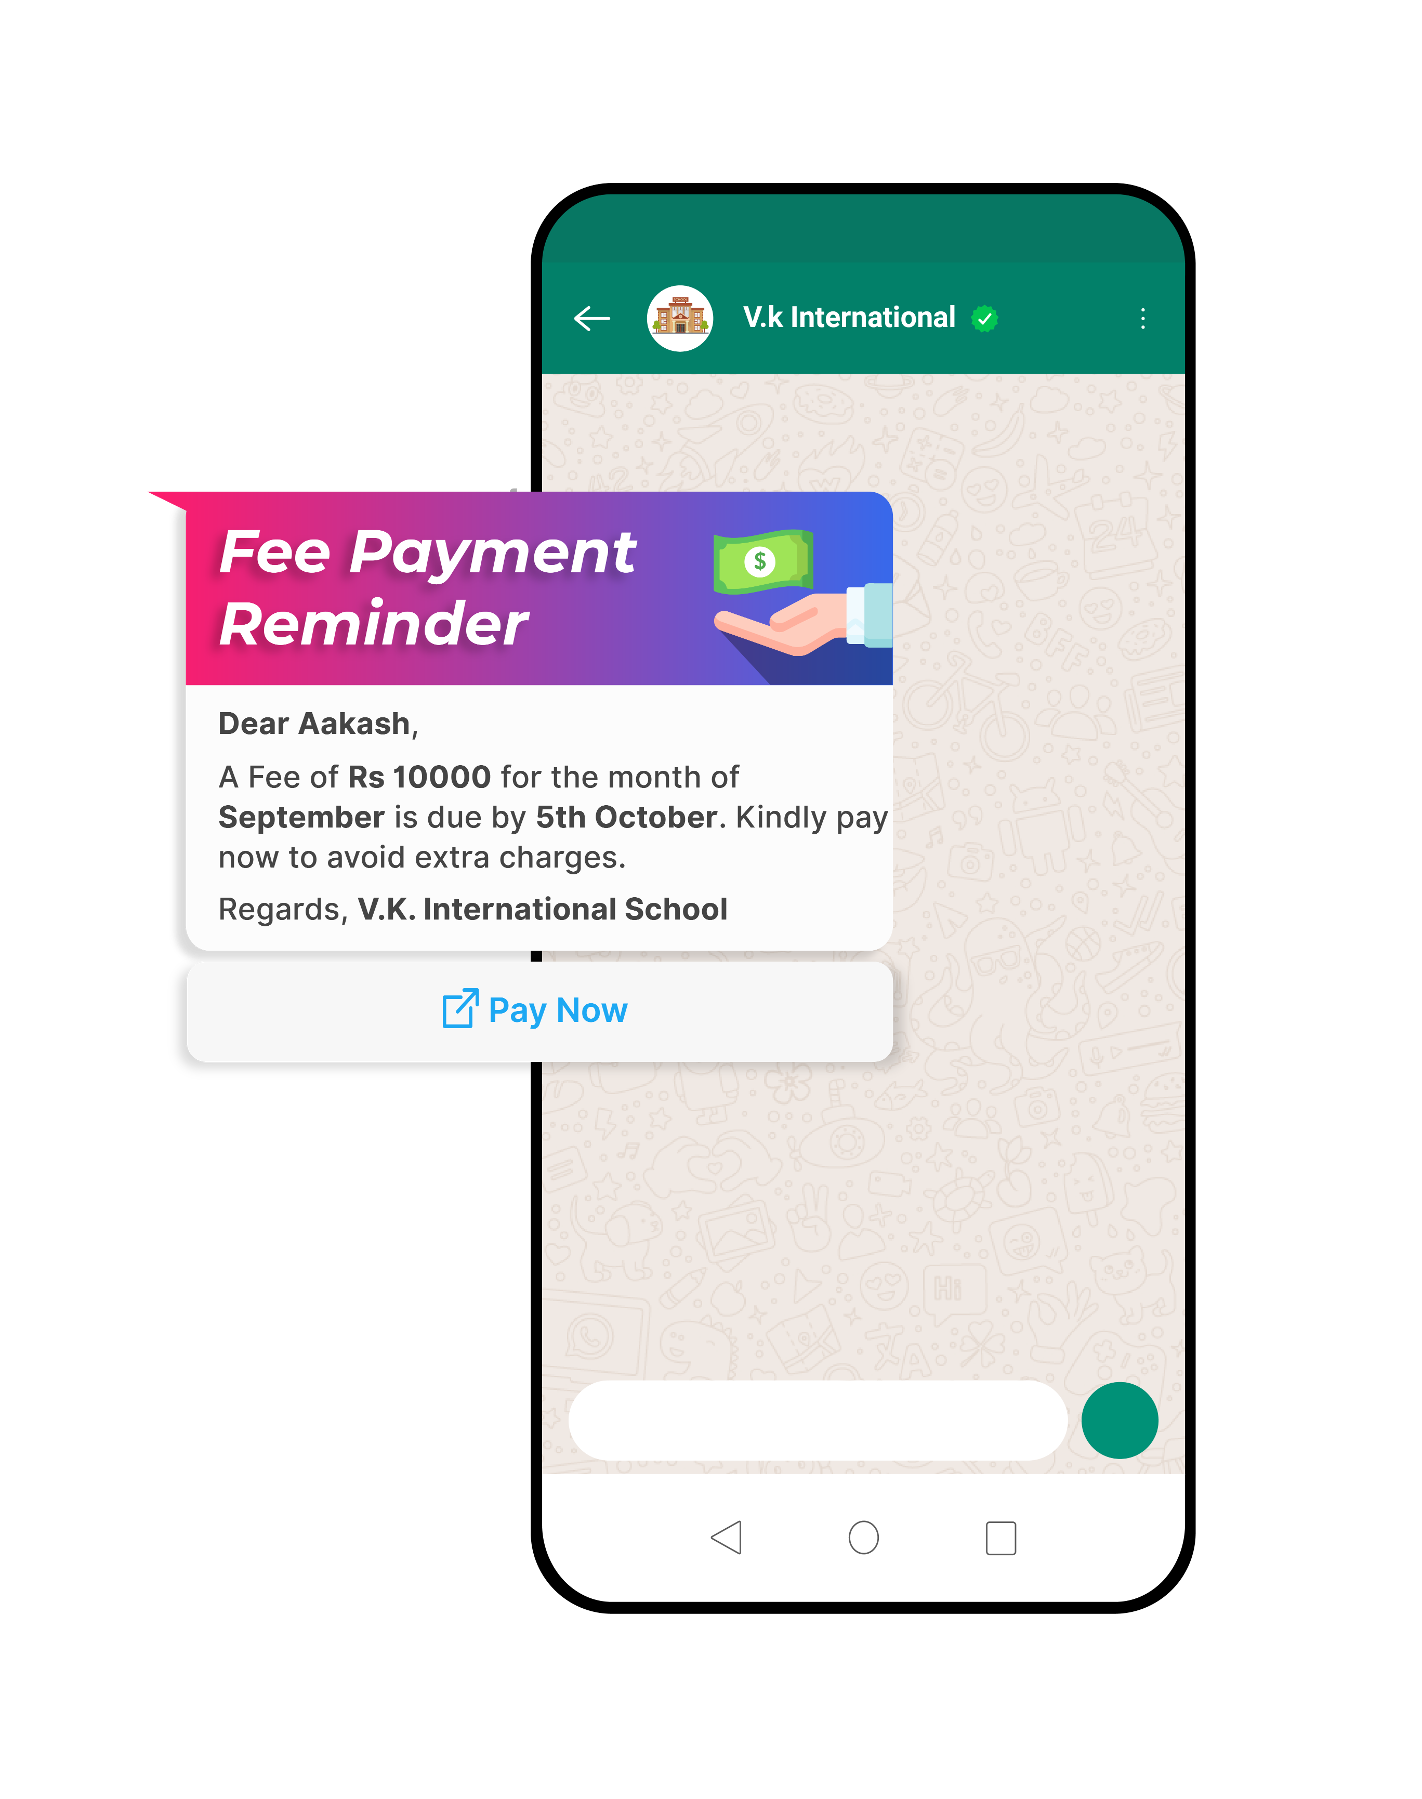 Fee Payment Reminder